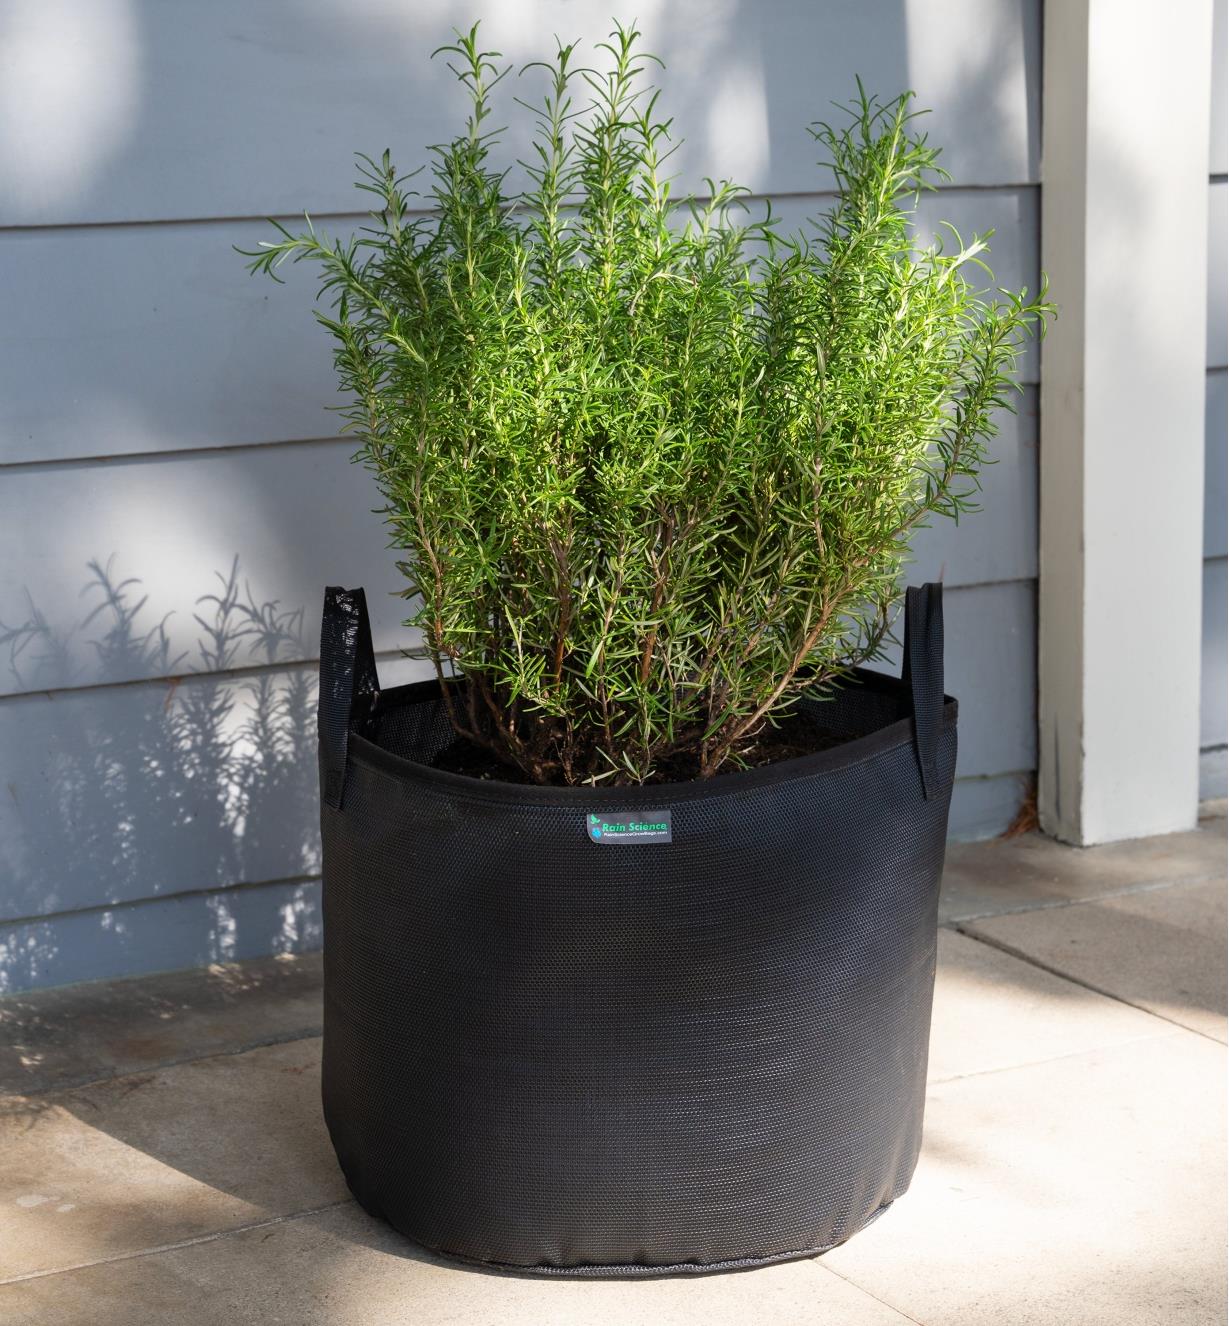 A 10 gallon mesh fabric pot with plants growing in it